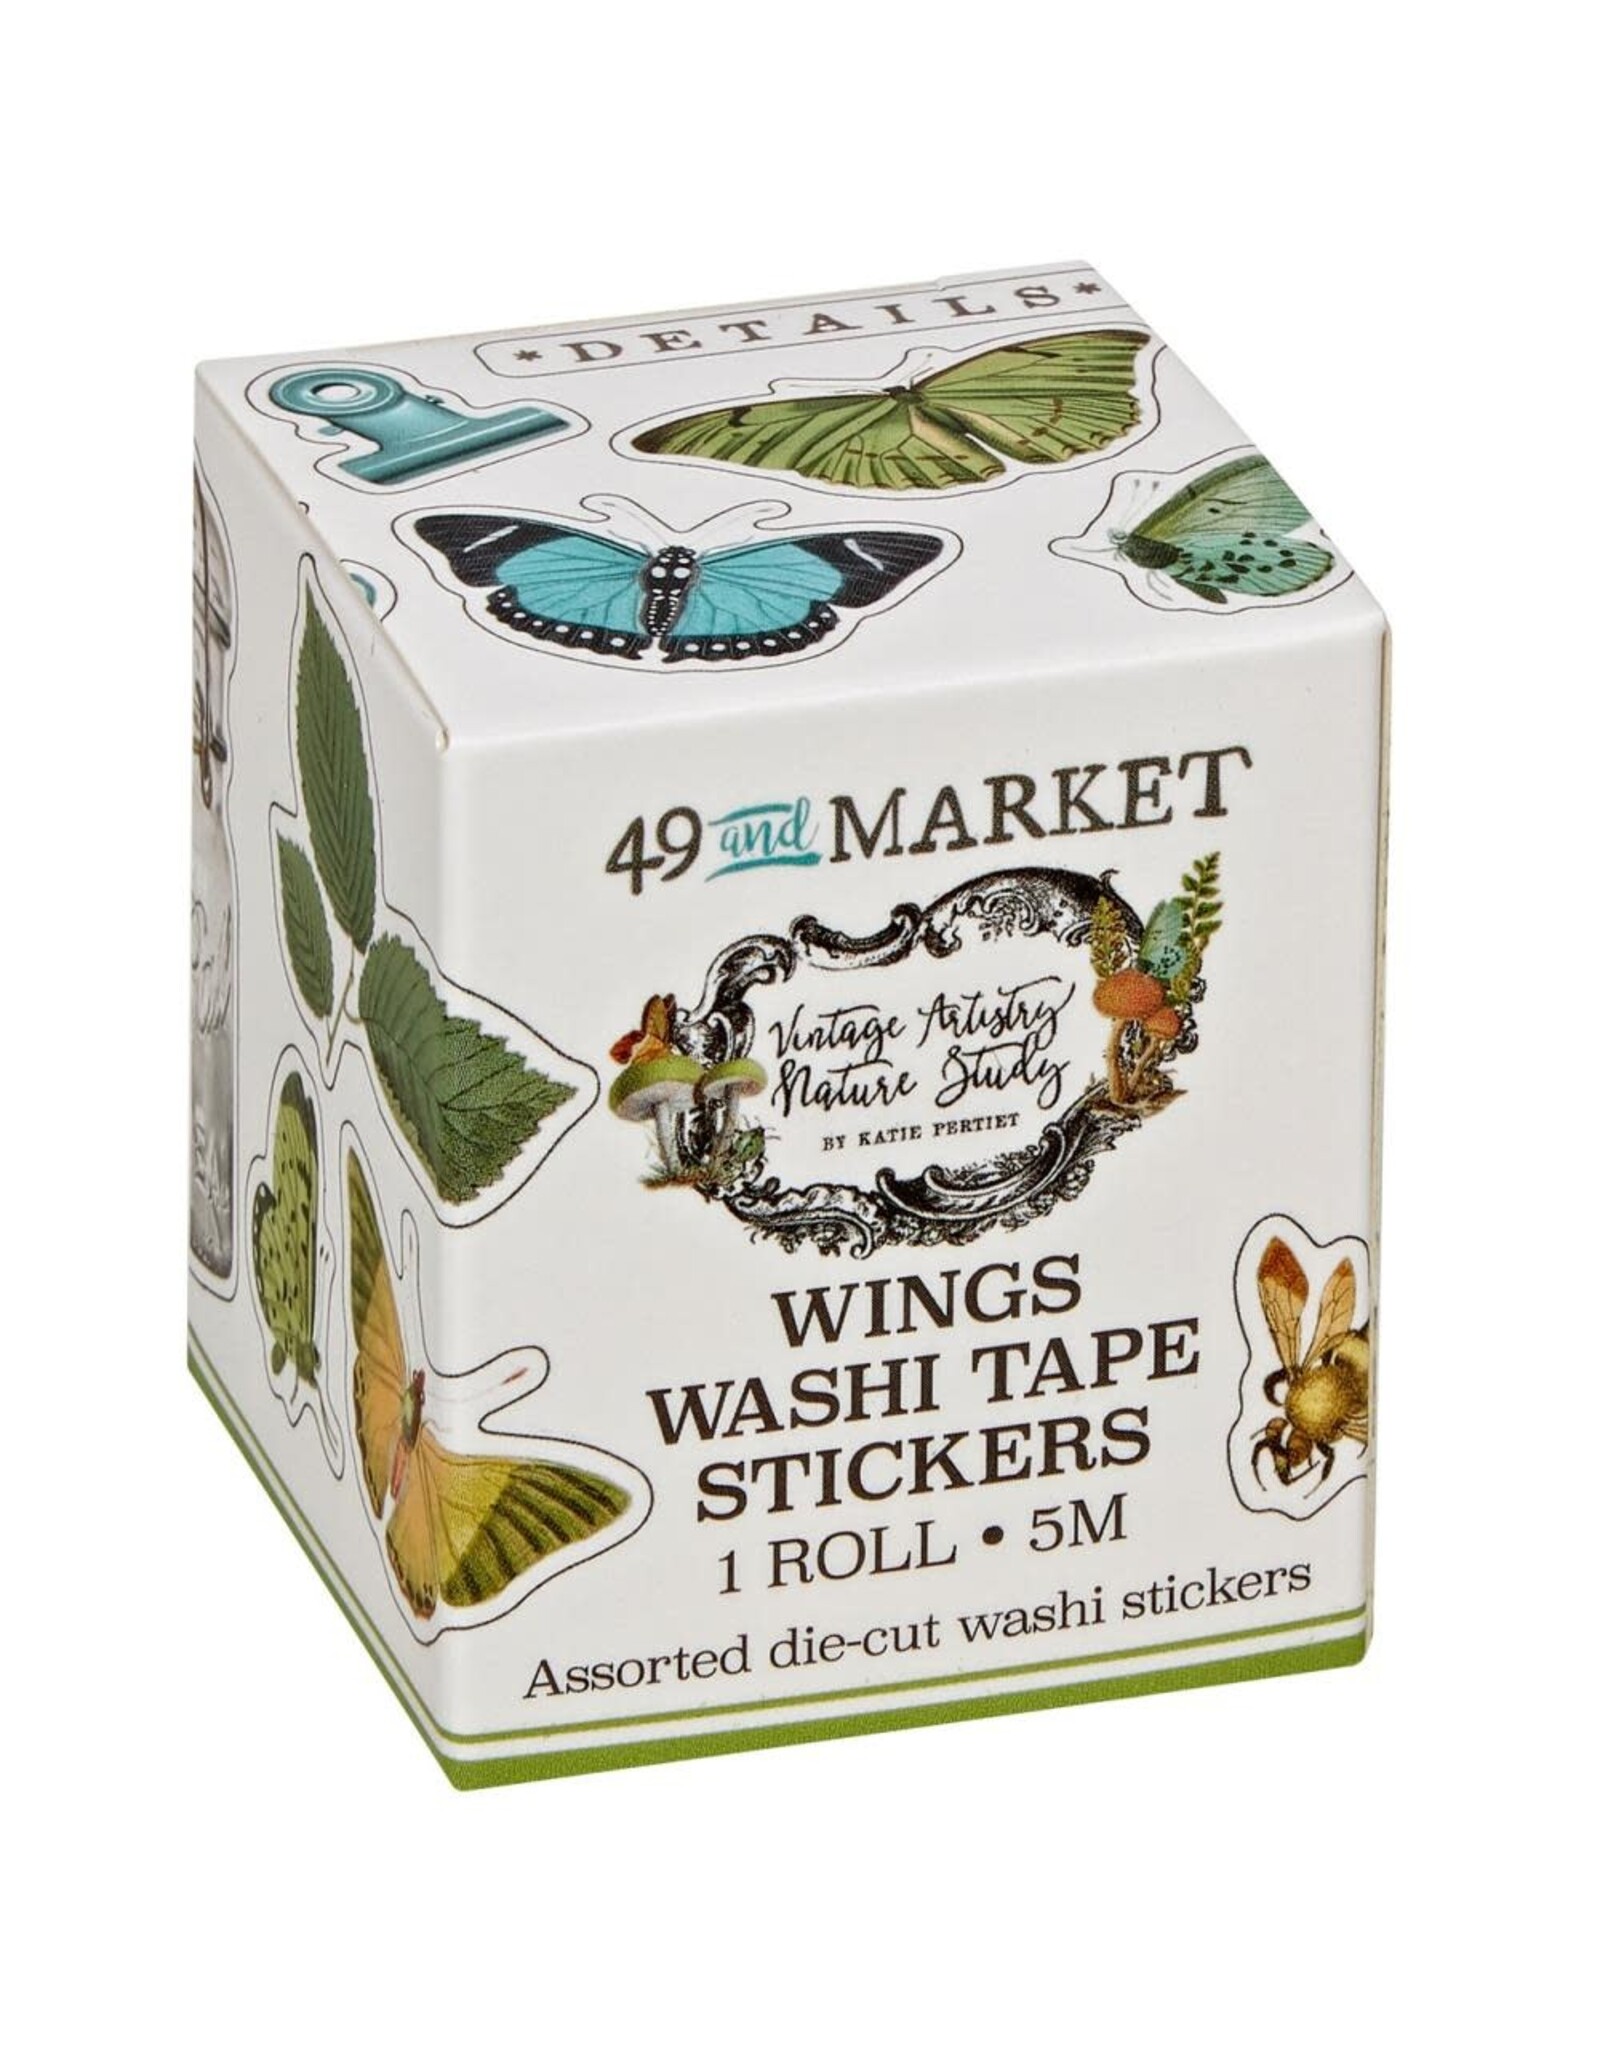 49 AND MARKET 49 AND MARKET VINTAGE ARTISTRY NATURE STUDY WINGS WASHI TAPE STICKERS